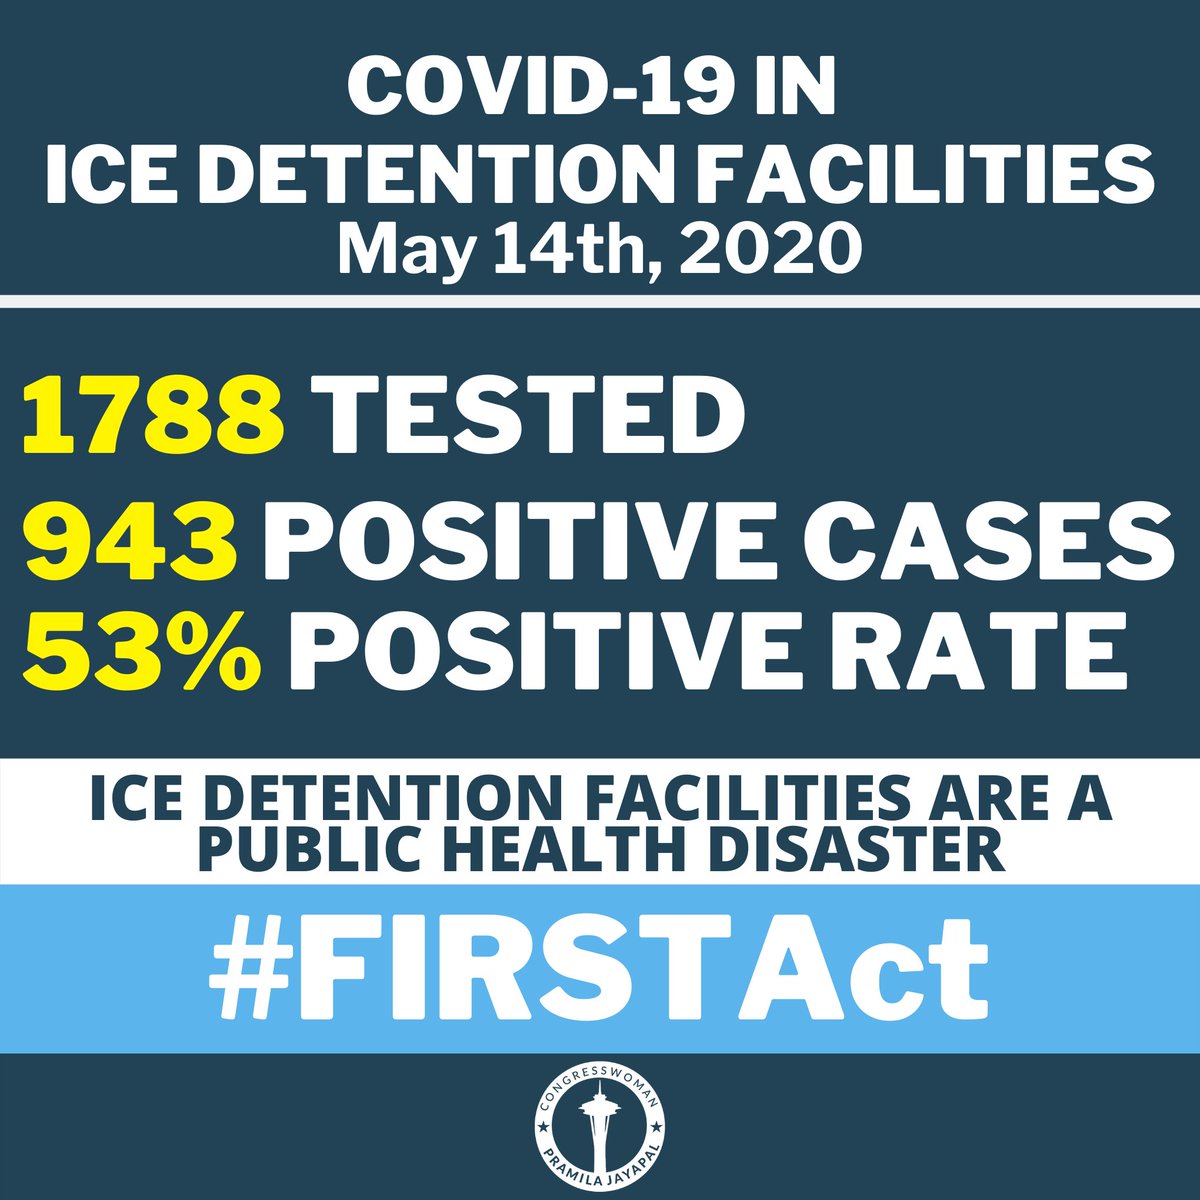 As of today, ICE has 943 confirmed cases. That’s a 53% positive rate. It’s clear that #COVID19 is spreading quickly in ICE facilities—leading to a shockingly high rate of positive cases. This is inhumane. More lives are at risk each day that we don’t pass my #FIRSTAct.